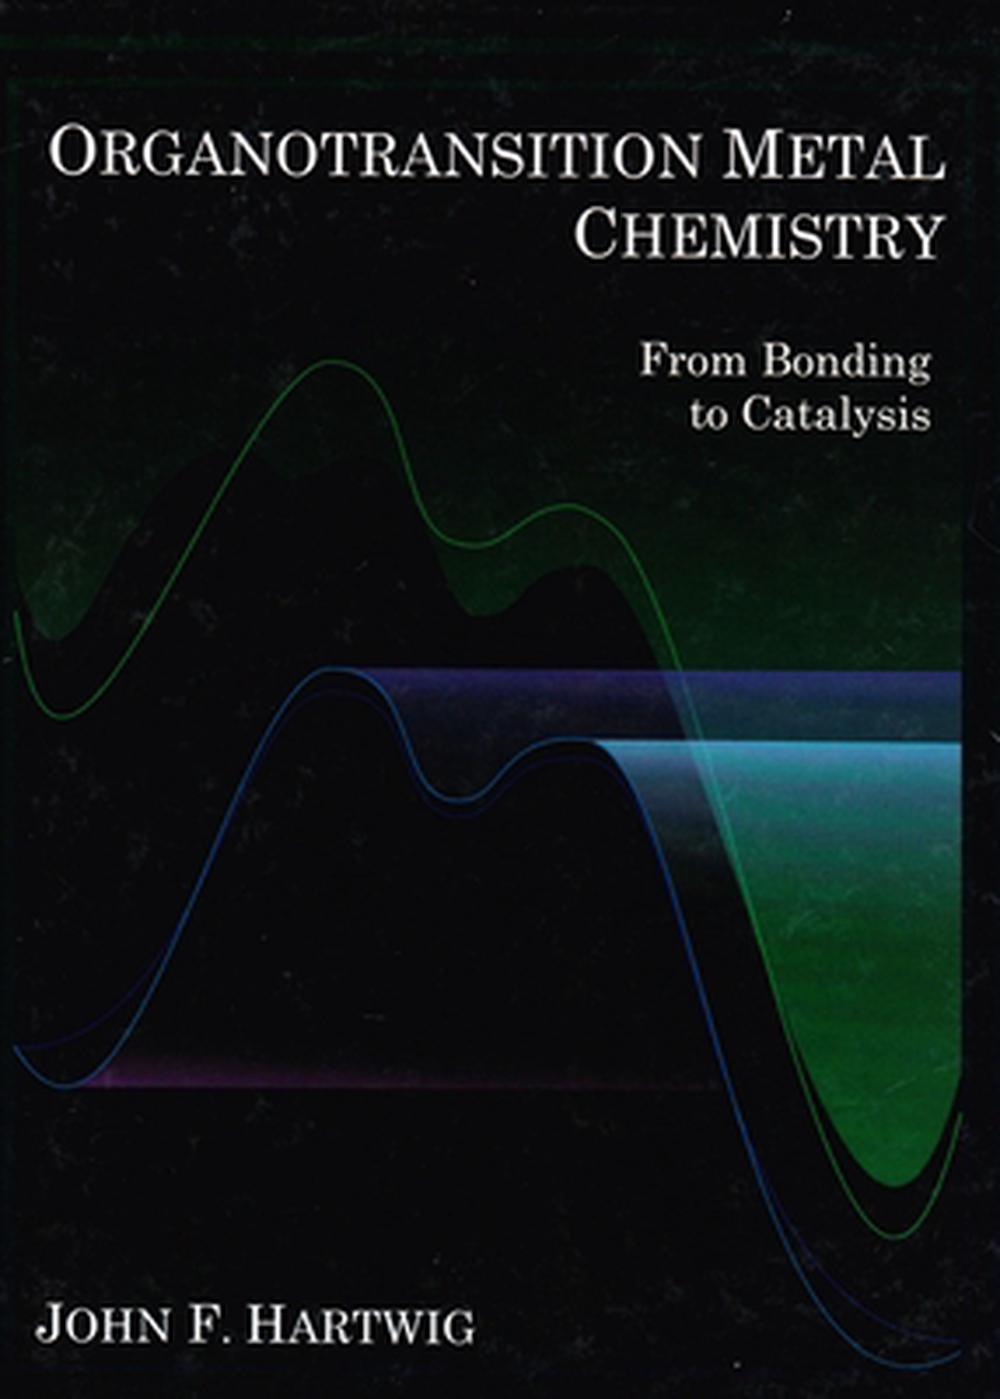 Organotransition Metal Chemistry From Bonding to Catalysis by John F. Hartwig ( 9781891389535